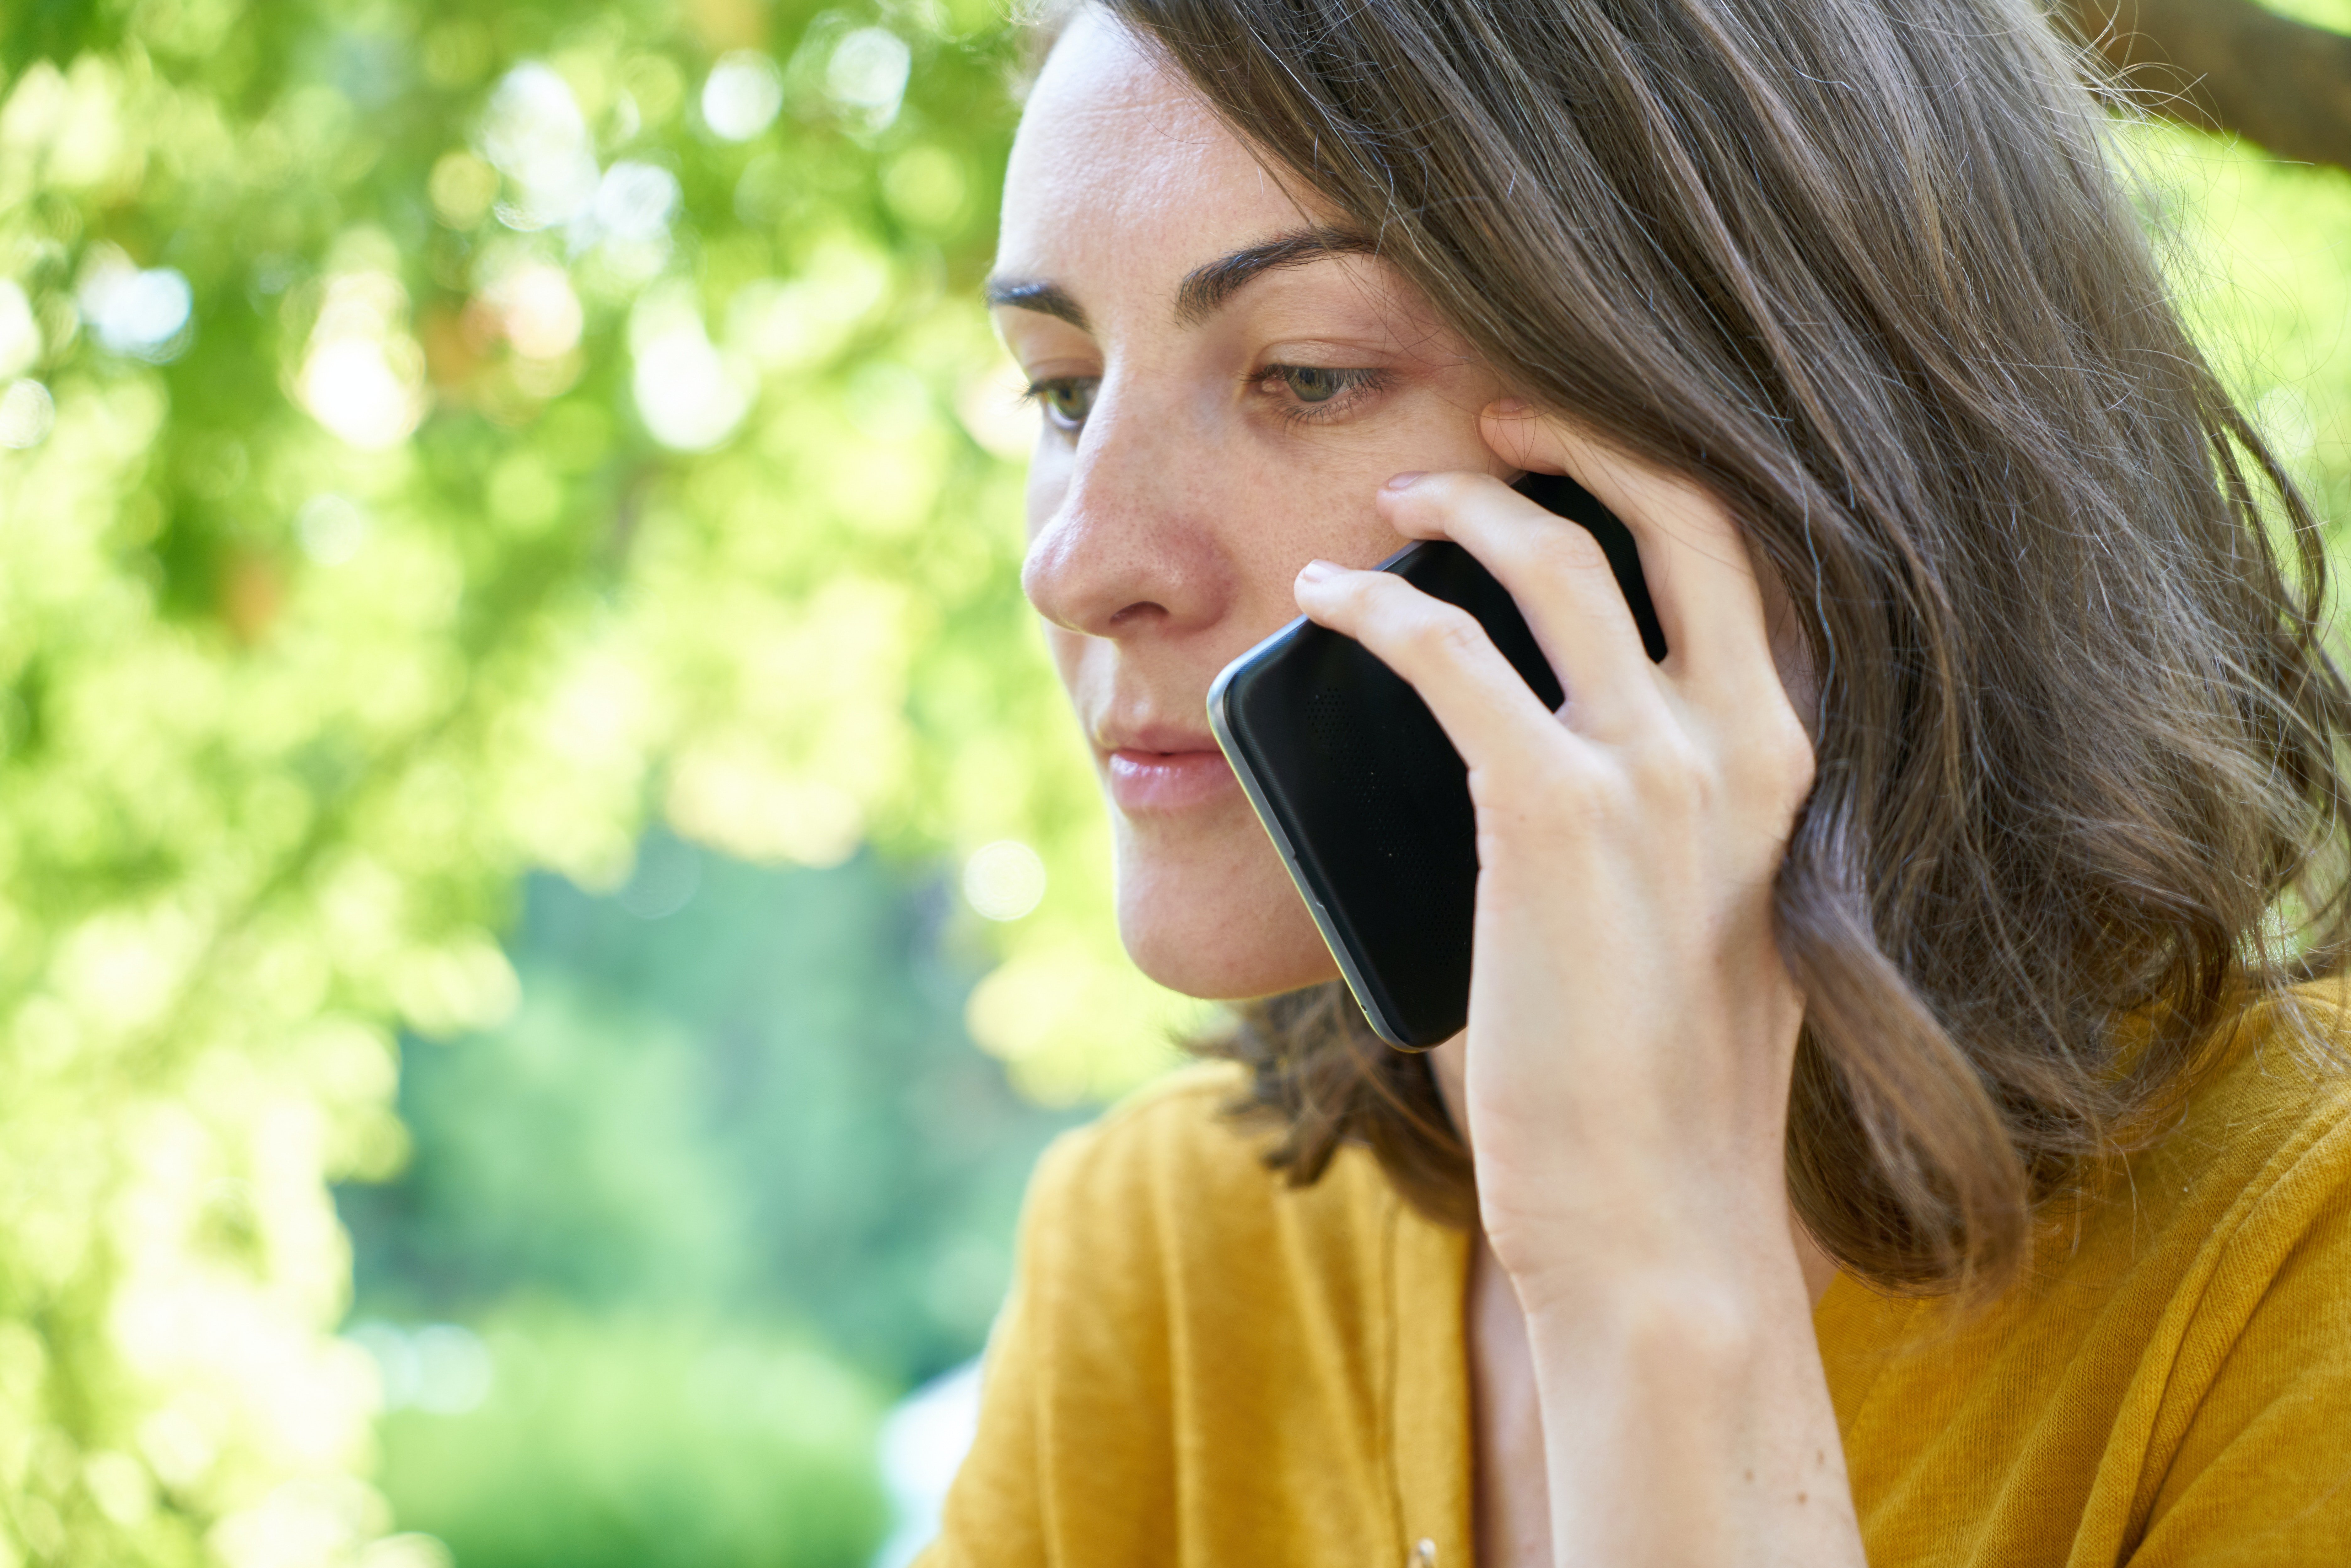 Woman on a phone call. | Source: Pexels